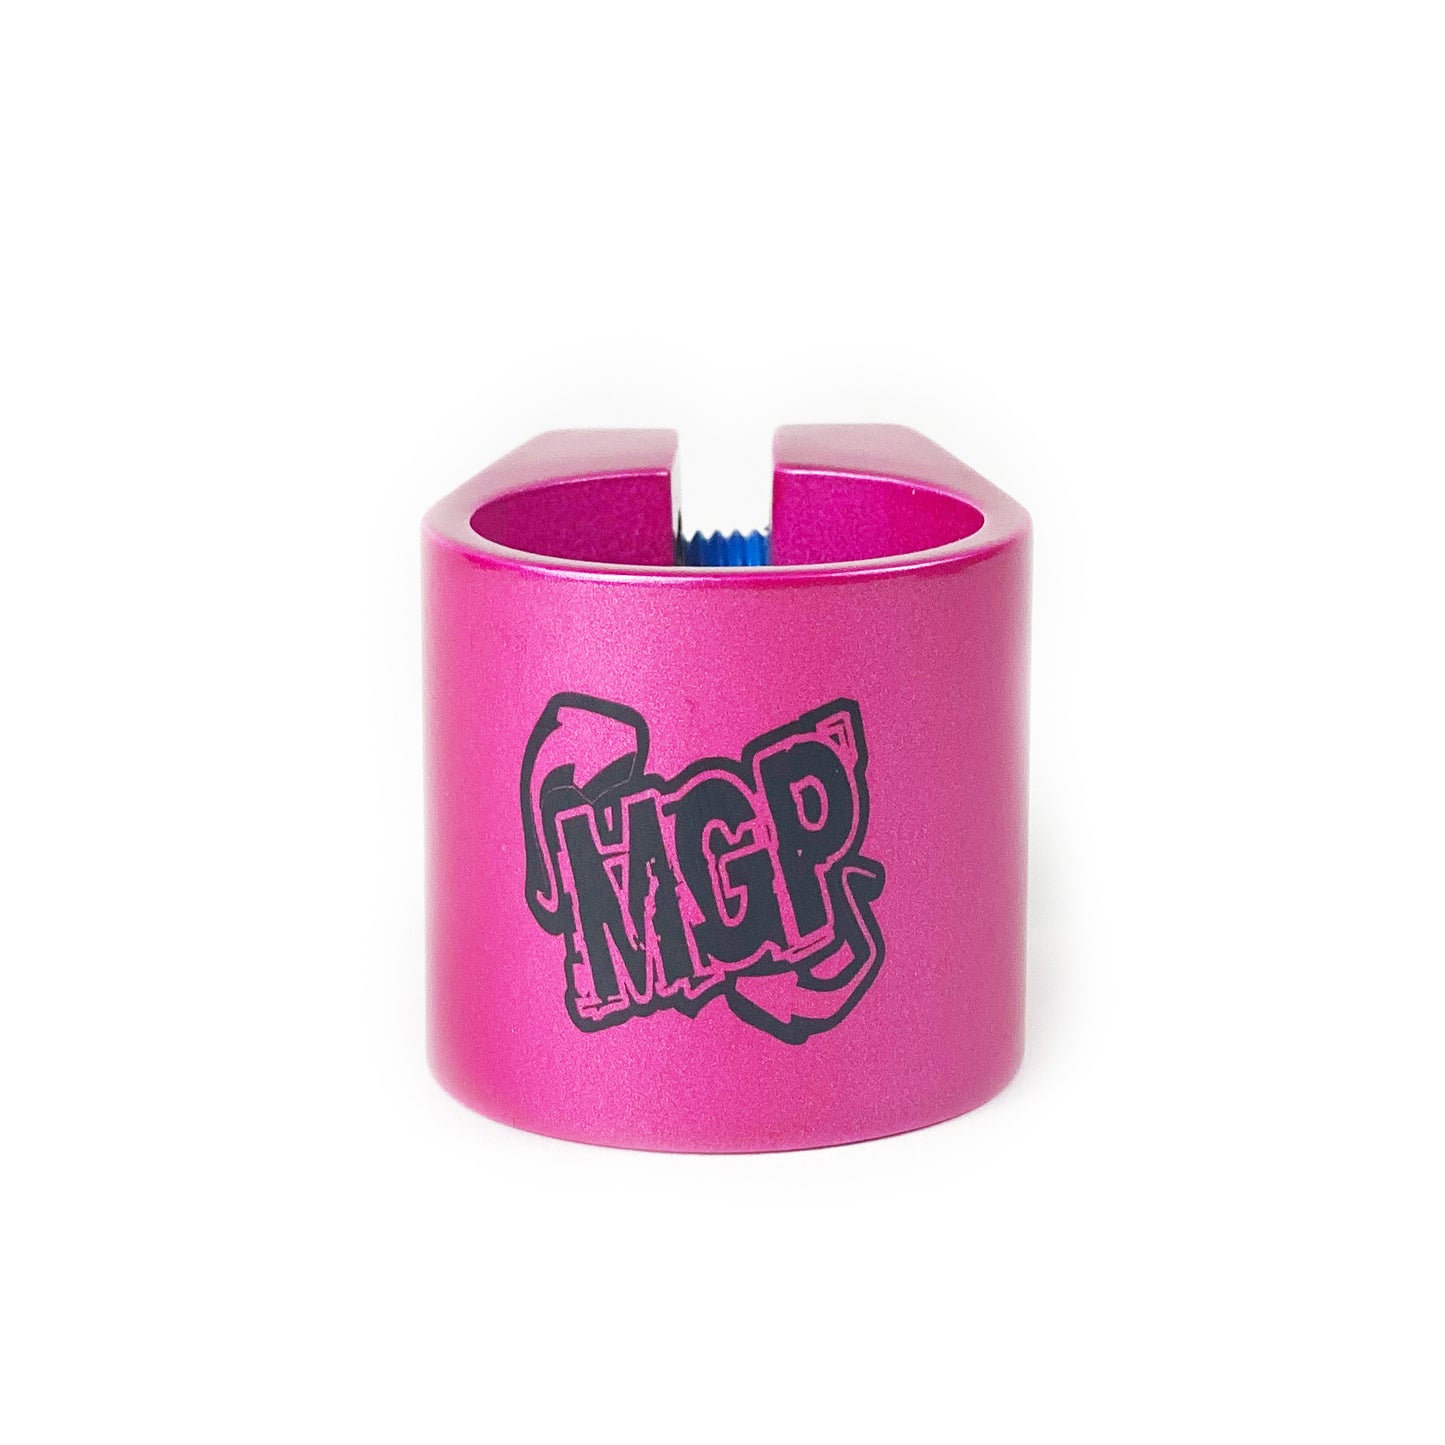 MGP MADD Double Clamp - Pink - Prime Delux Store